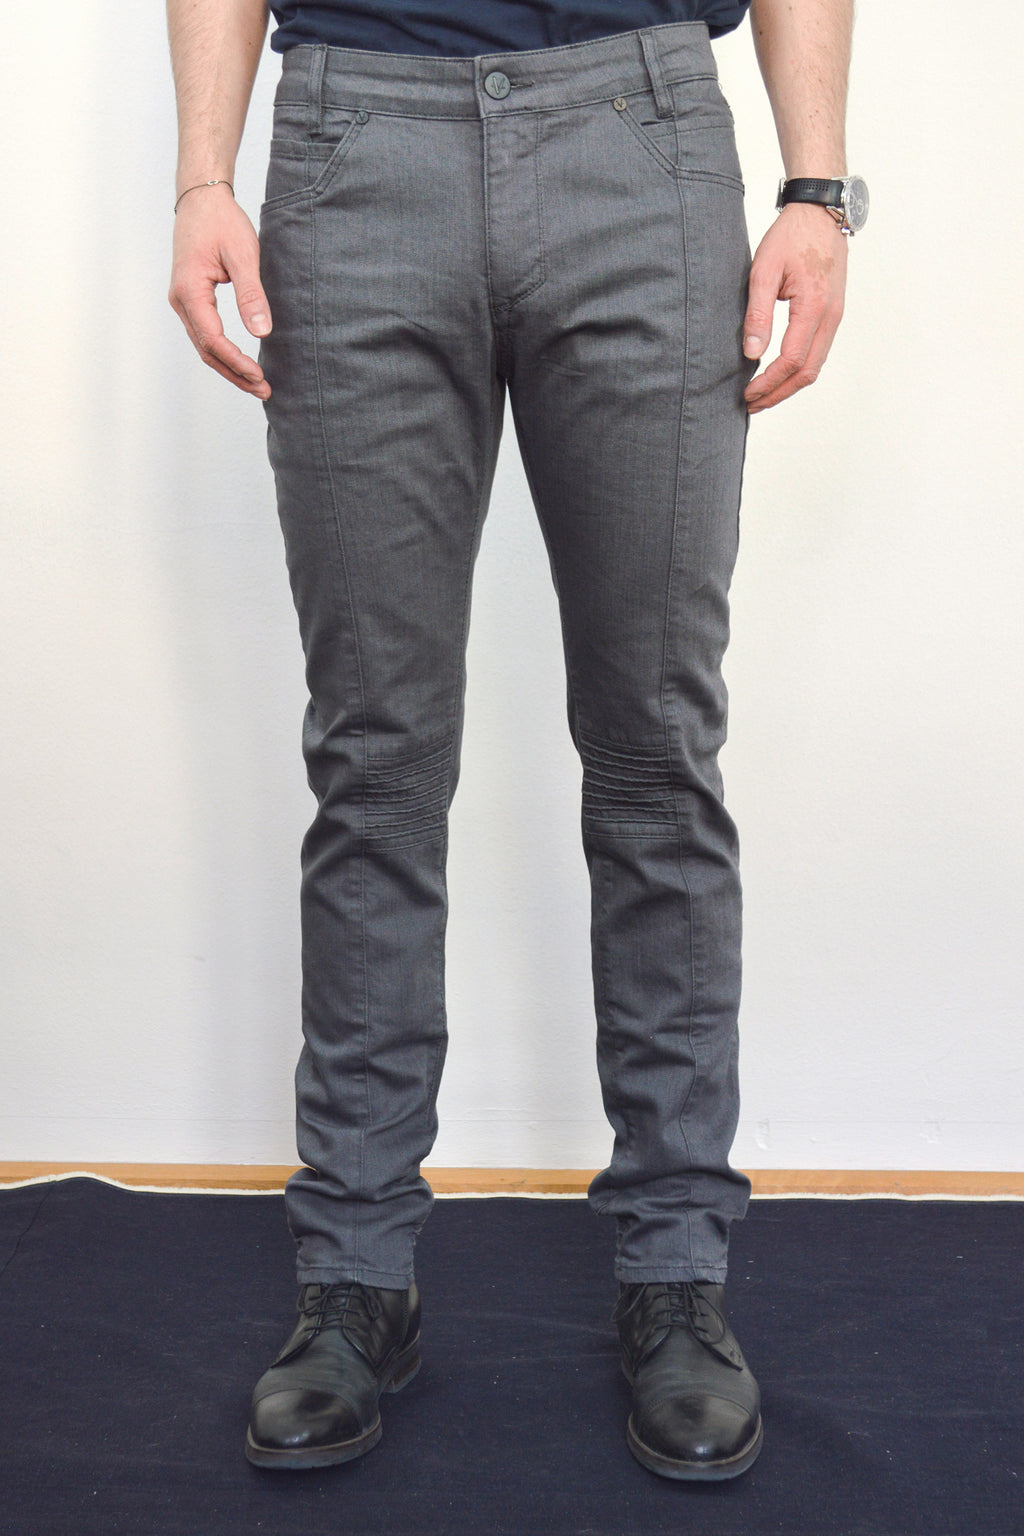 Second Choice - Francis Skinny Jeans Grey